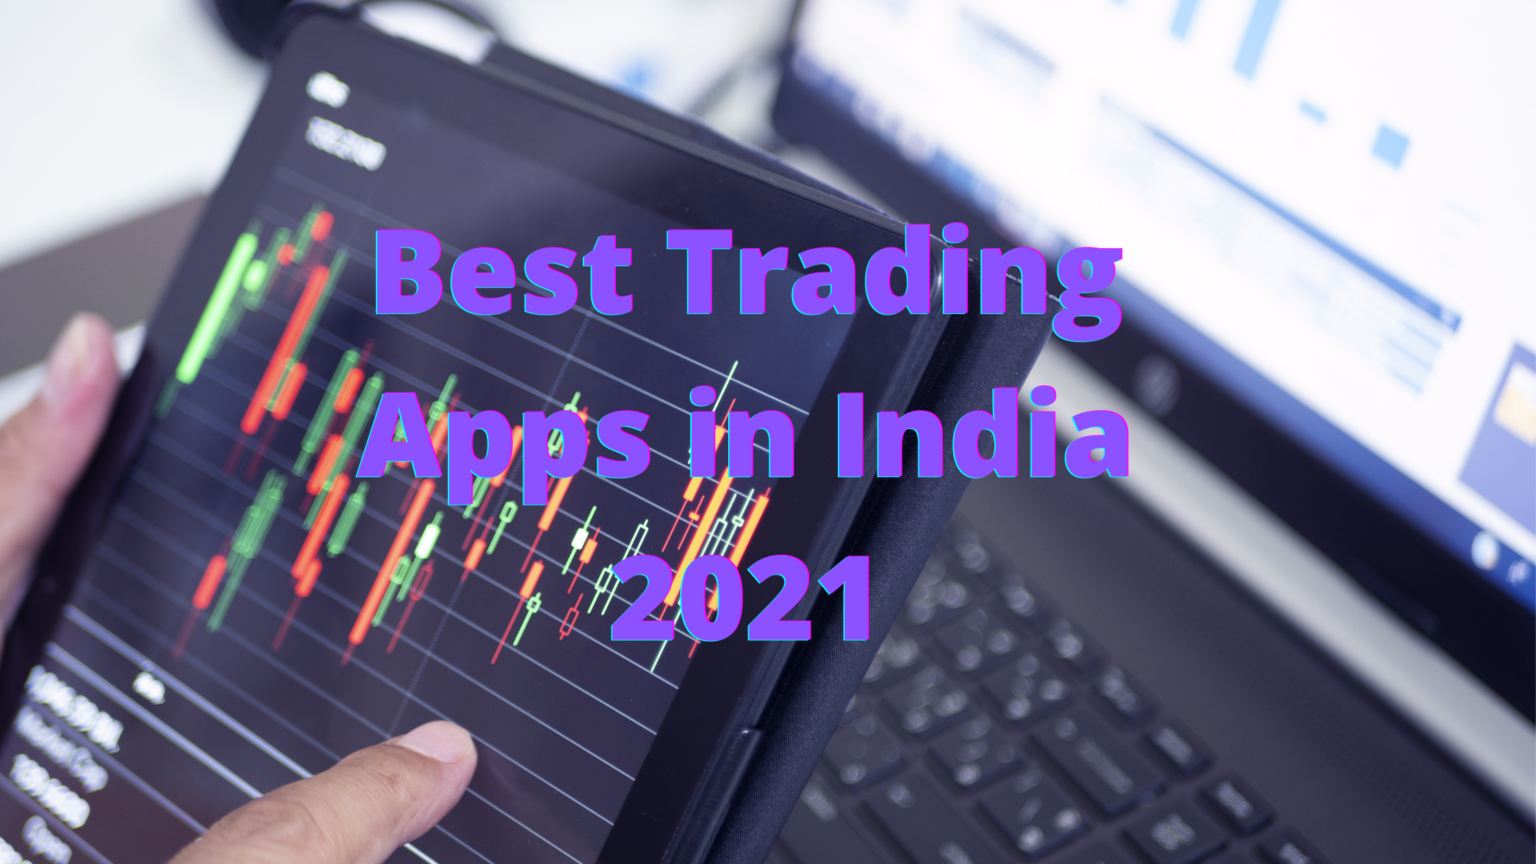 Top 5 Best Trading Apps In India For Beginners 2021